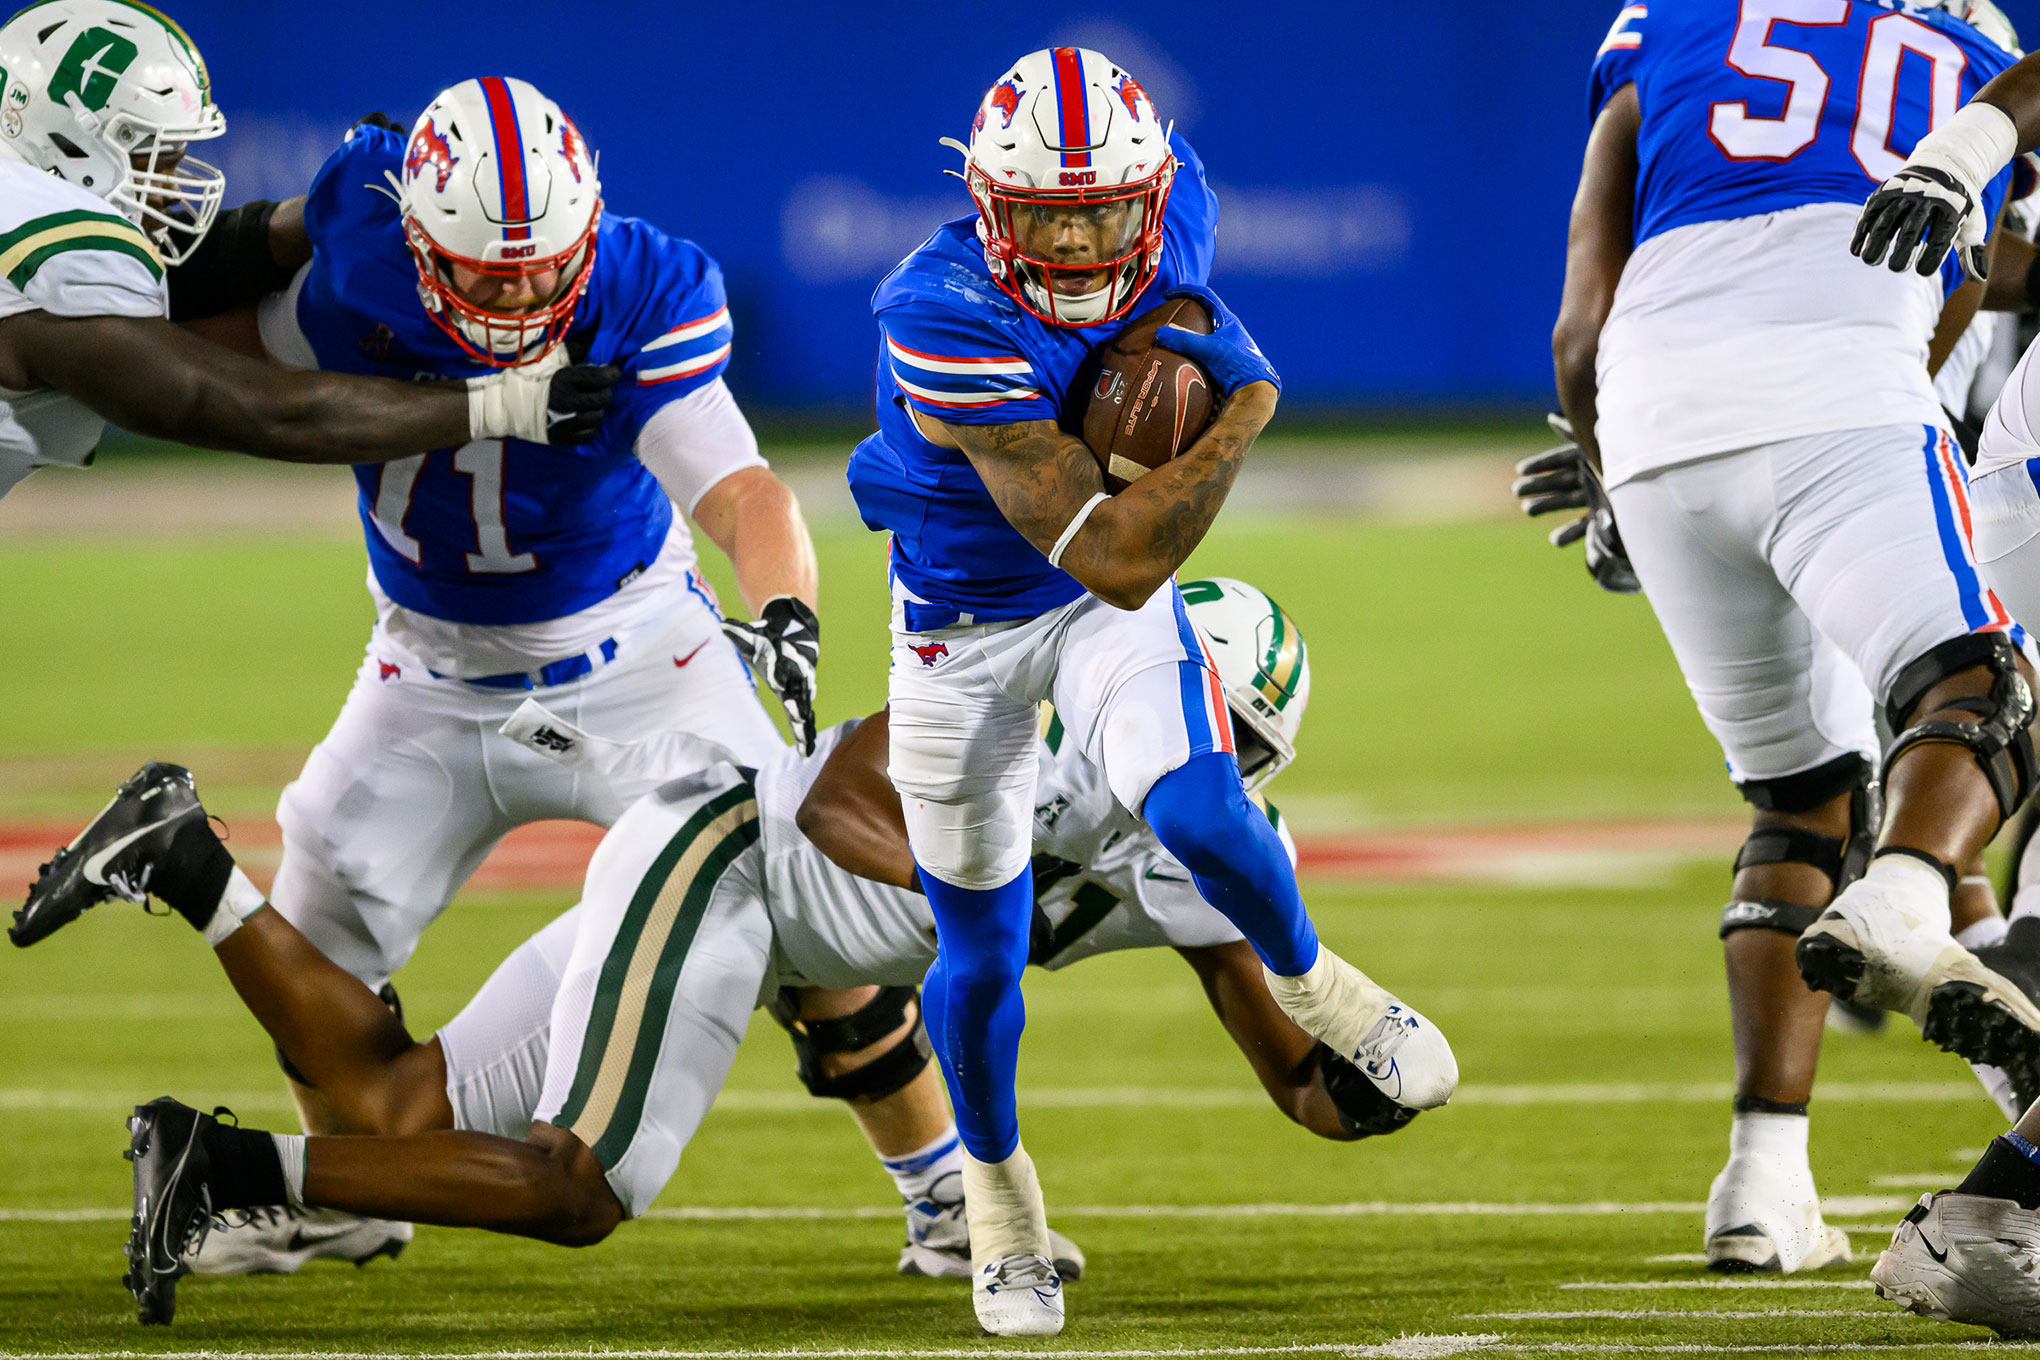  SMU football player running with the ball